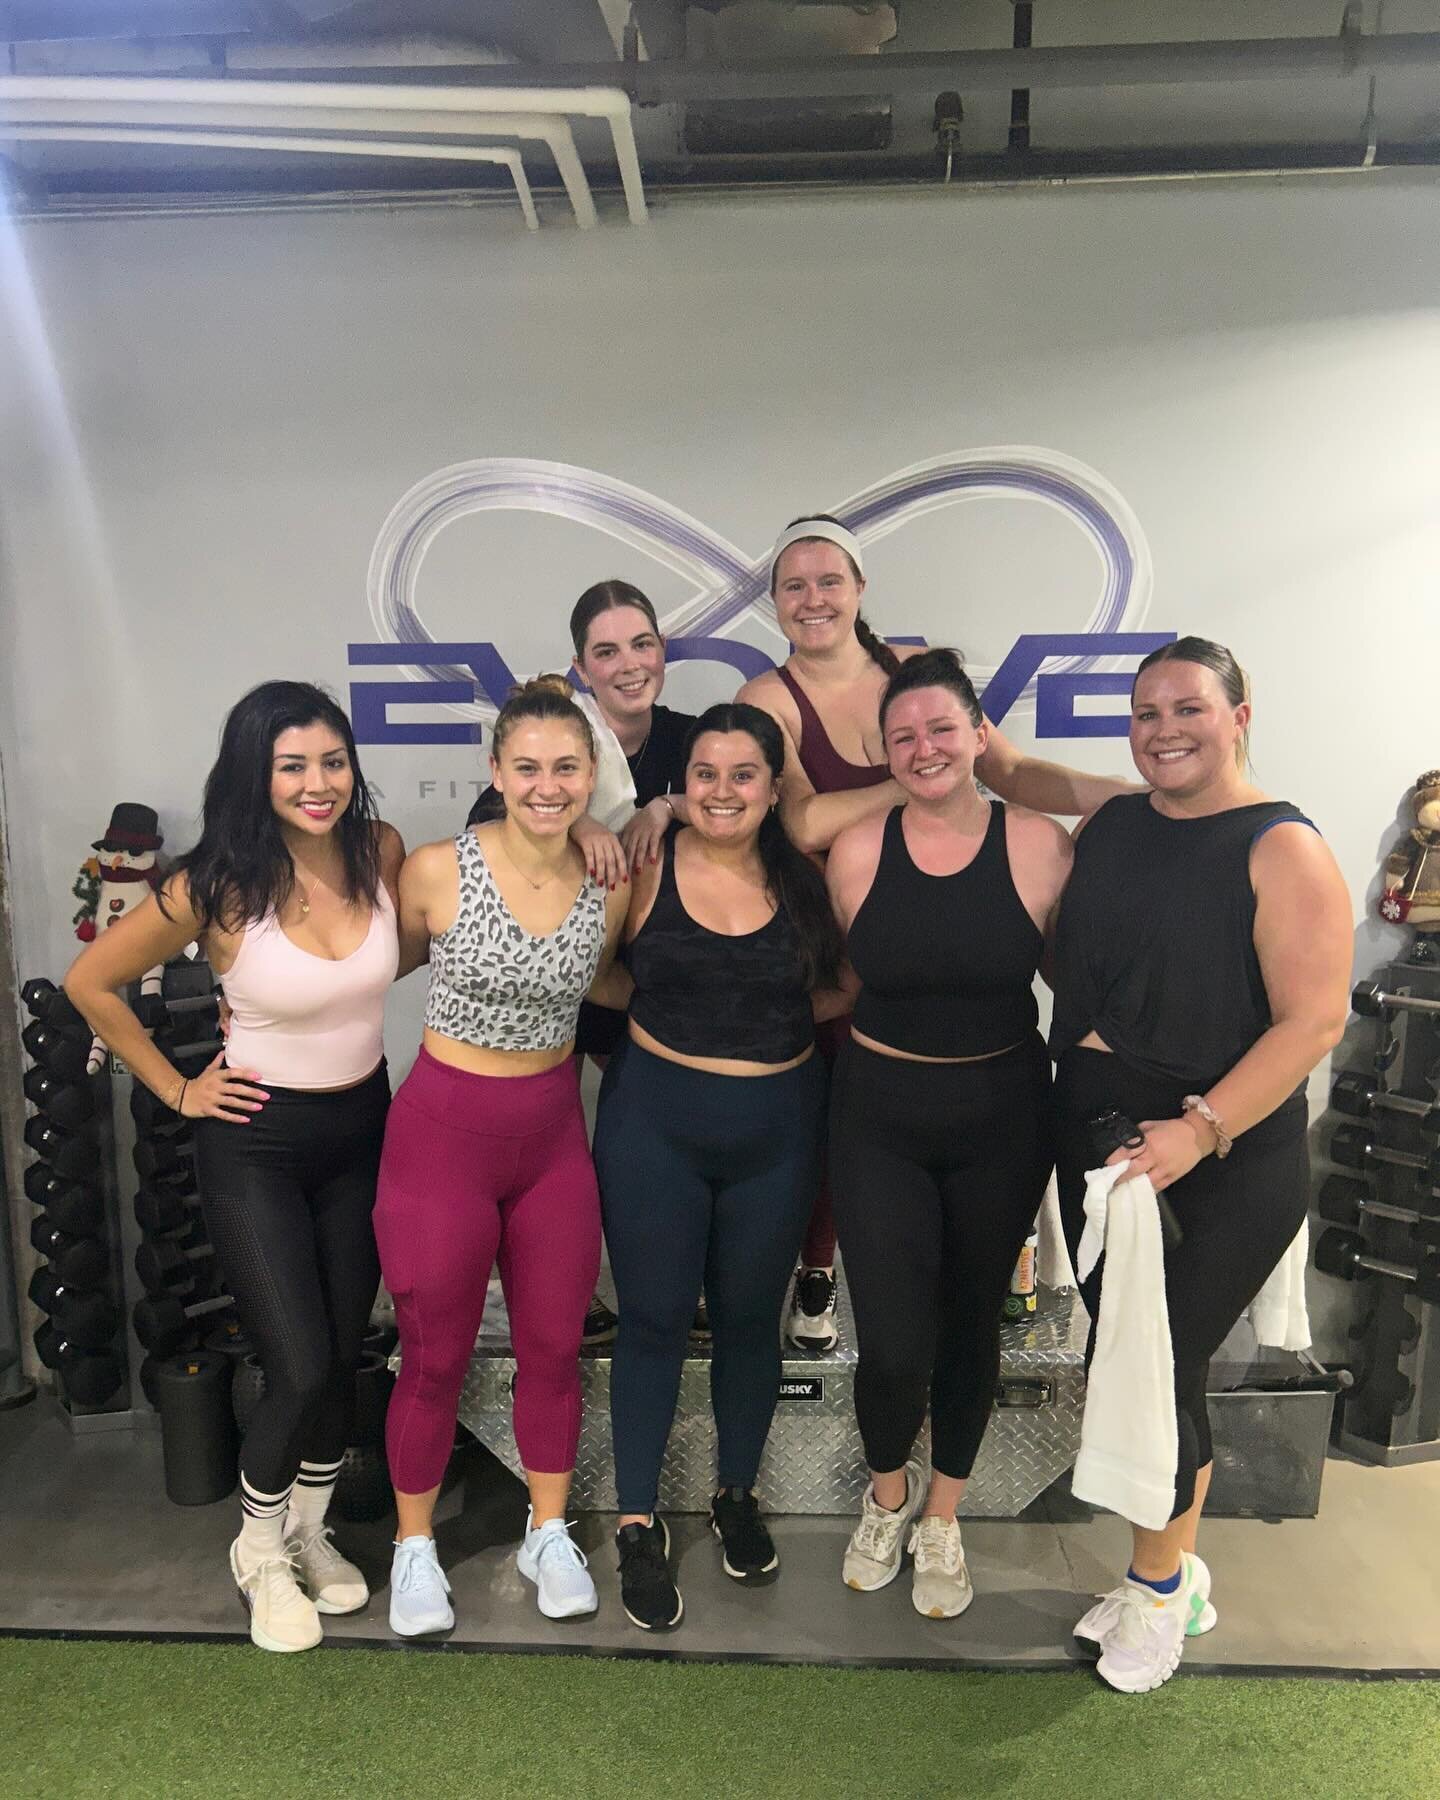 We are a week into the new year and we&rsquo;ve already seen so many fun friend dates from our ambassadors. 🥹

This week we kick off with 2 of our member events at @paradigmgyms and @lumin.fitness. Can&rsquo;t wait to see everyone.

From coffee date